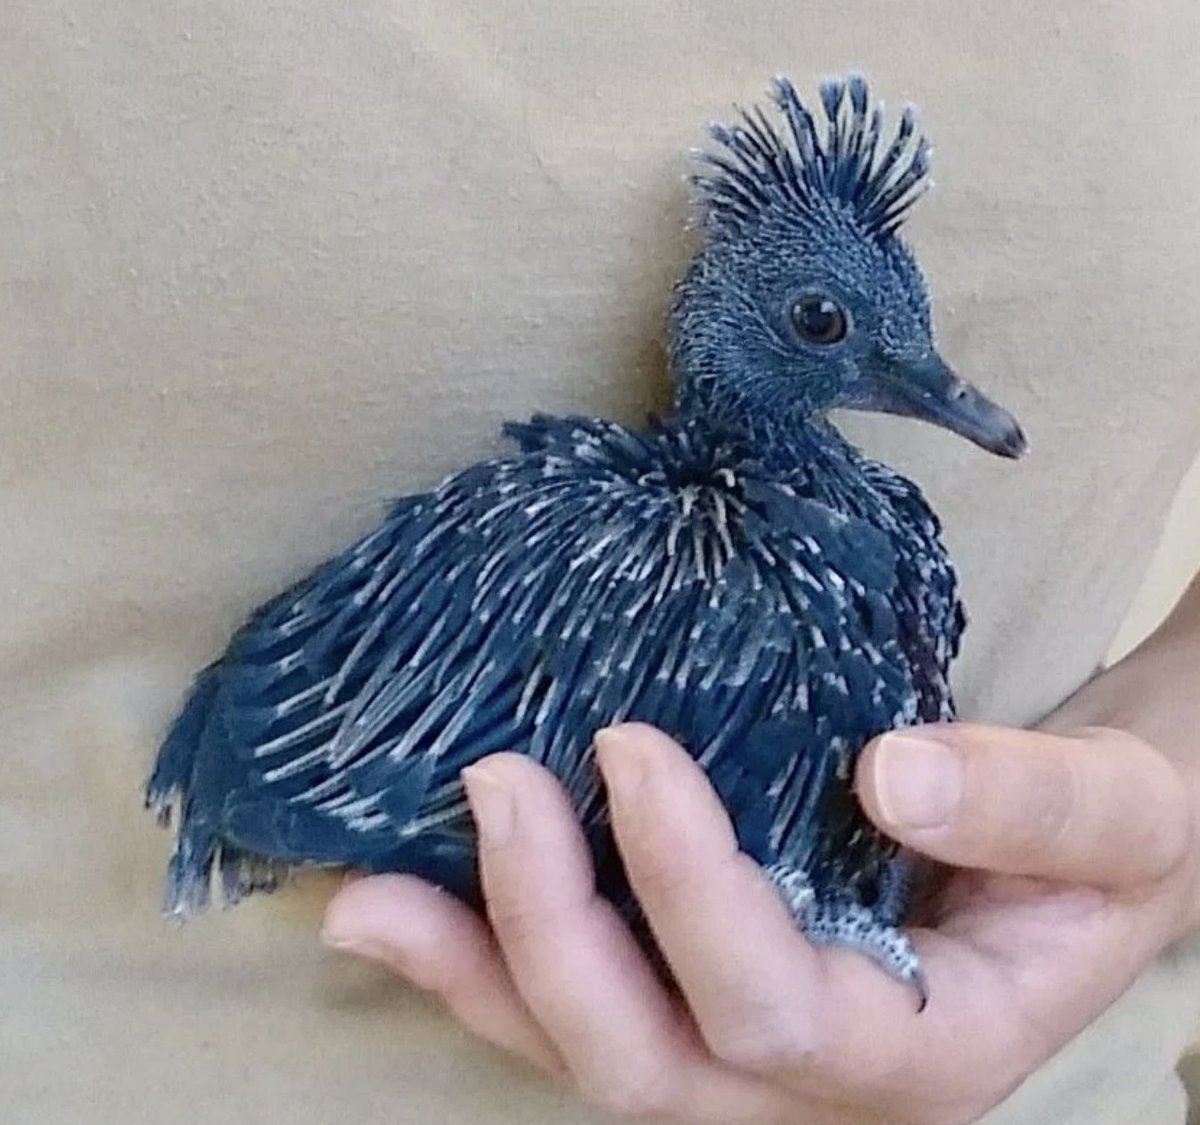 I knew about fancy domestic pigeons, but I didn't realize there were so many stunningly beautiful wild pigeons, too.This is the Victoria crowned pigeon. When it's born, it looks like a muppet that fell into a blueberry pie, but it eventually matures into an imperial majesty